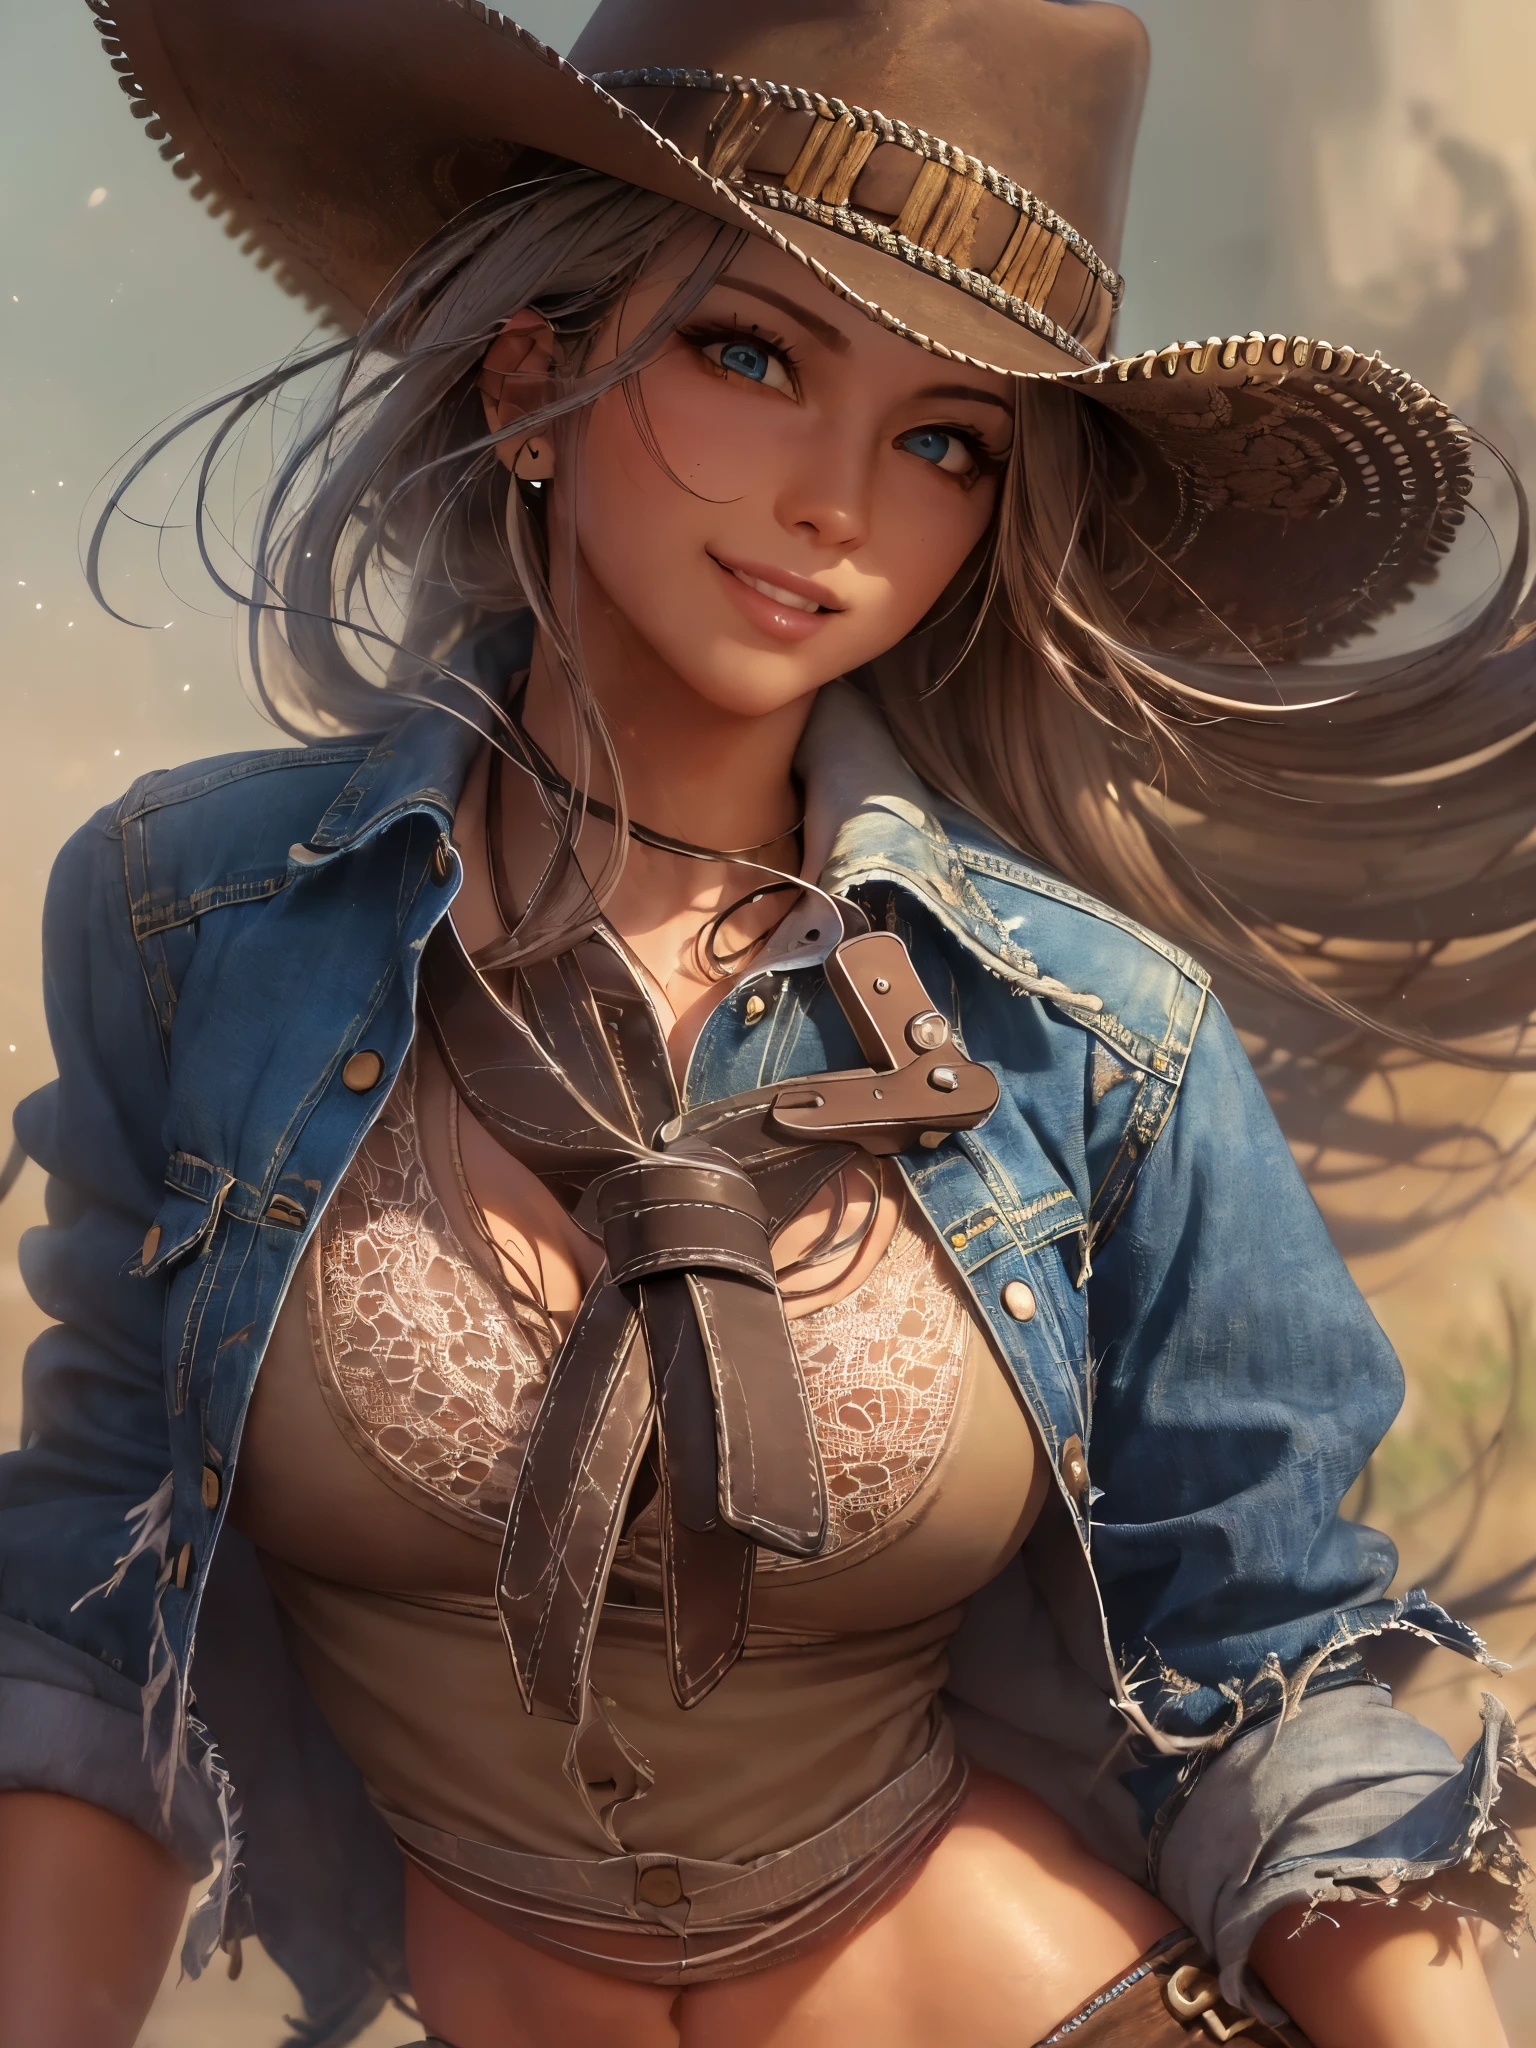 ((highest quality)),(Ultra-high resolution),(Very detailed),(Detailed Description),((The best CG)),(A masterpiece),Ultra-precise art,amazing drawing art,(Art with precise detail:1.5), (Female gunslinger:1.5),(Beautiful and well-proportioned face:1.6),(Toned body:1.7),(Denim Fashion:1.6),(Cleavage:1.6),(Fearless smile:1.6), ((Wild West:1.6)), Flying dust:1.6